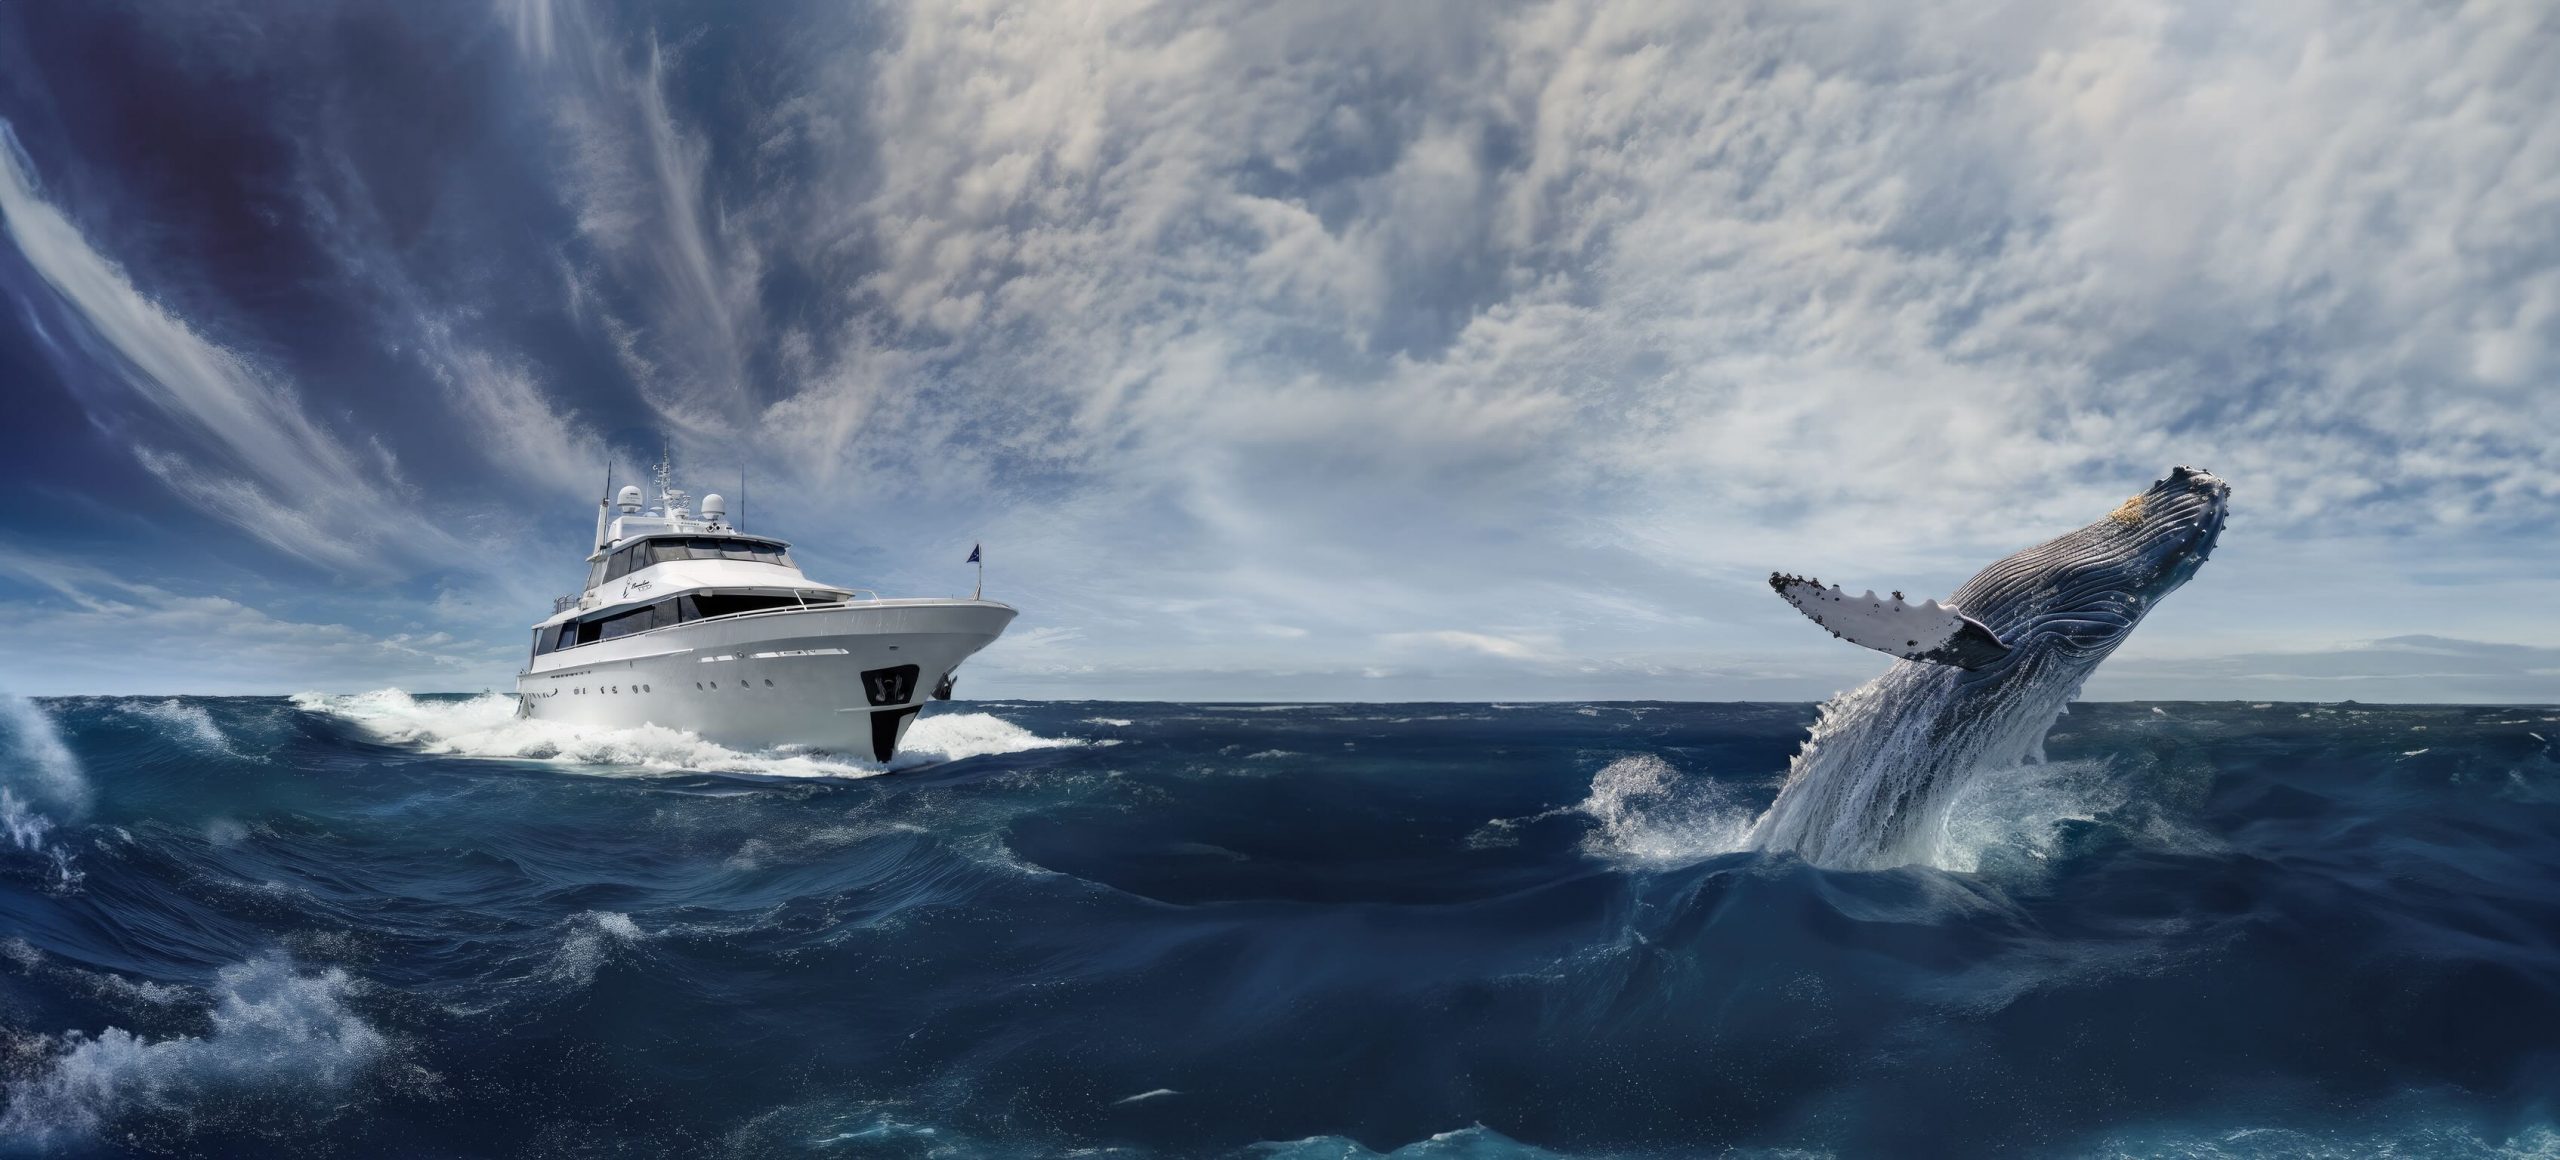 Real and AI images combine to show a whale breaching in the ocean in front of a super yacht